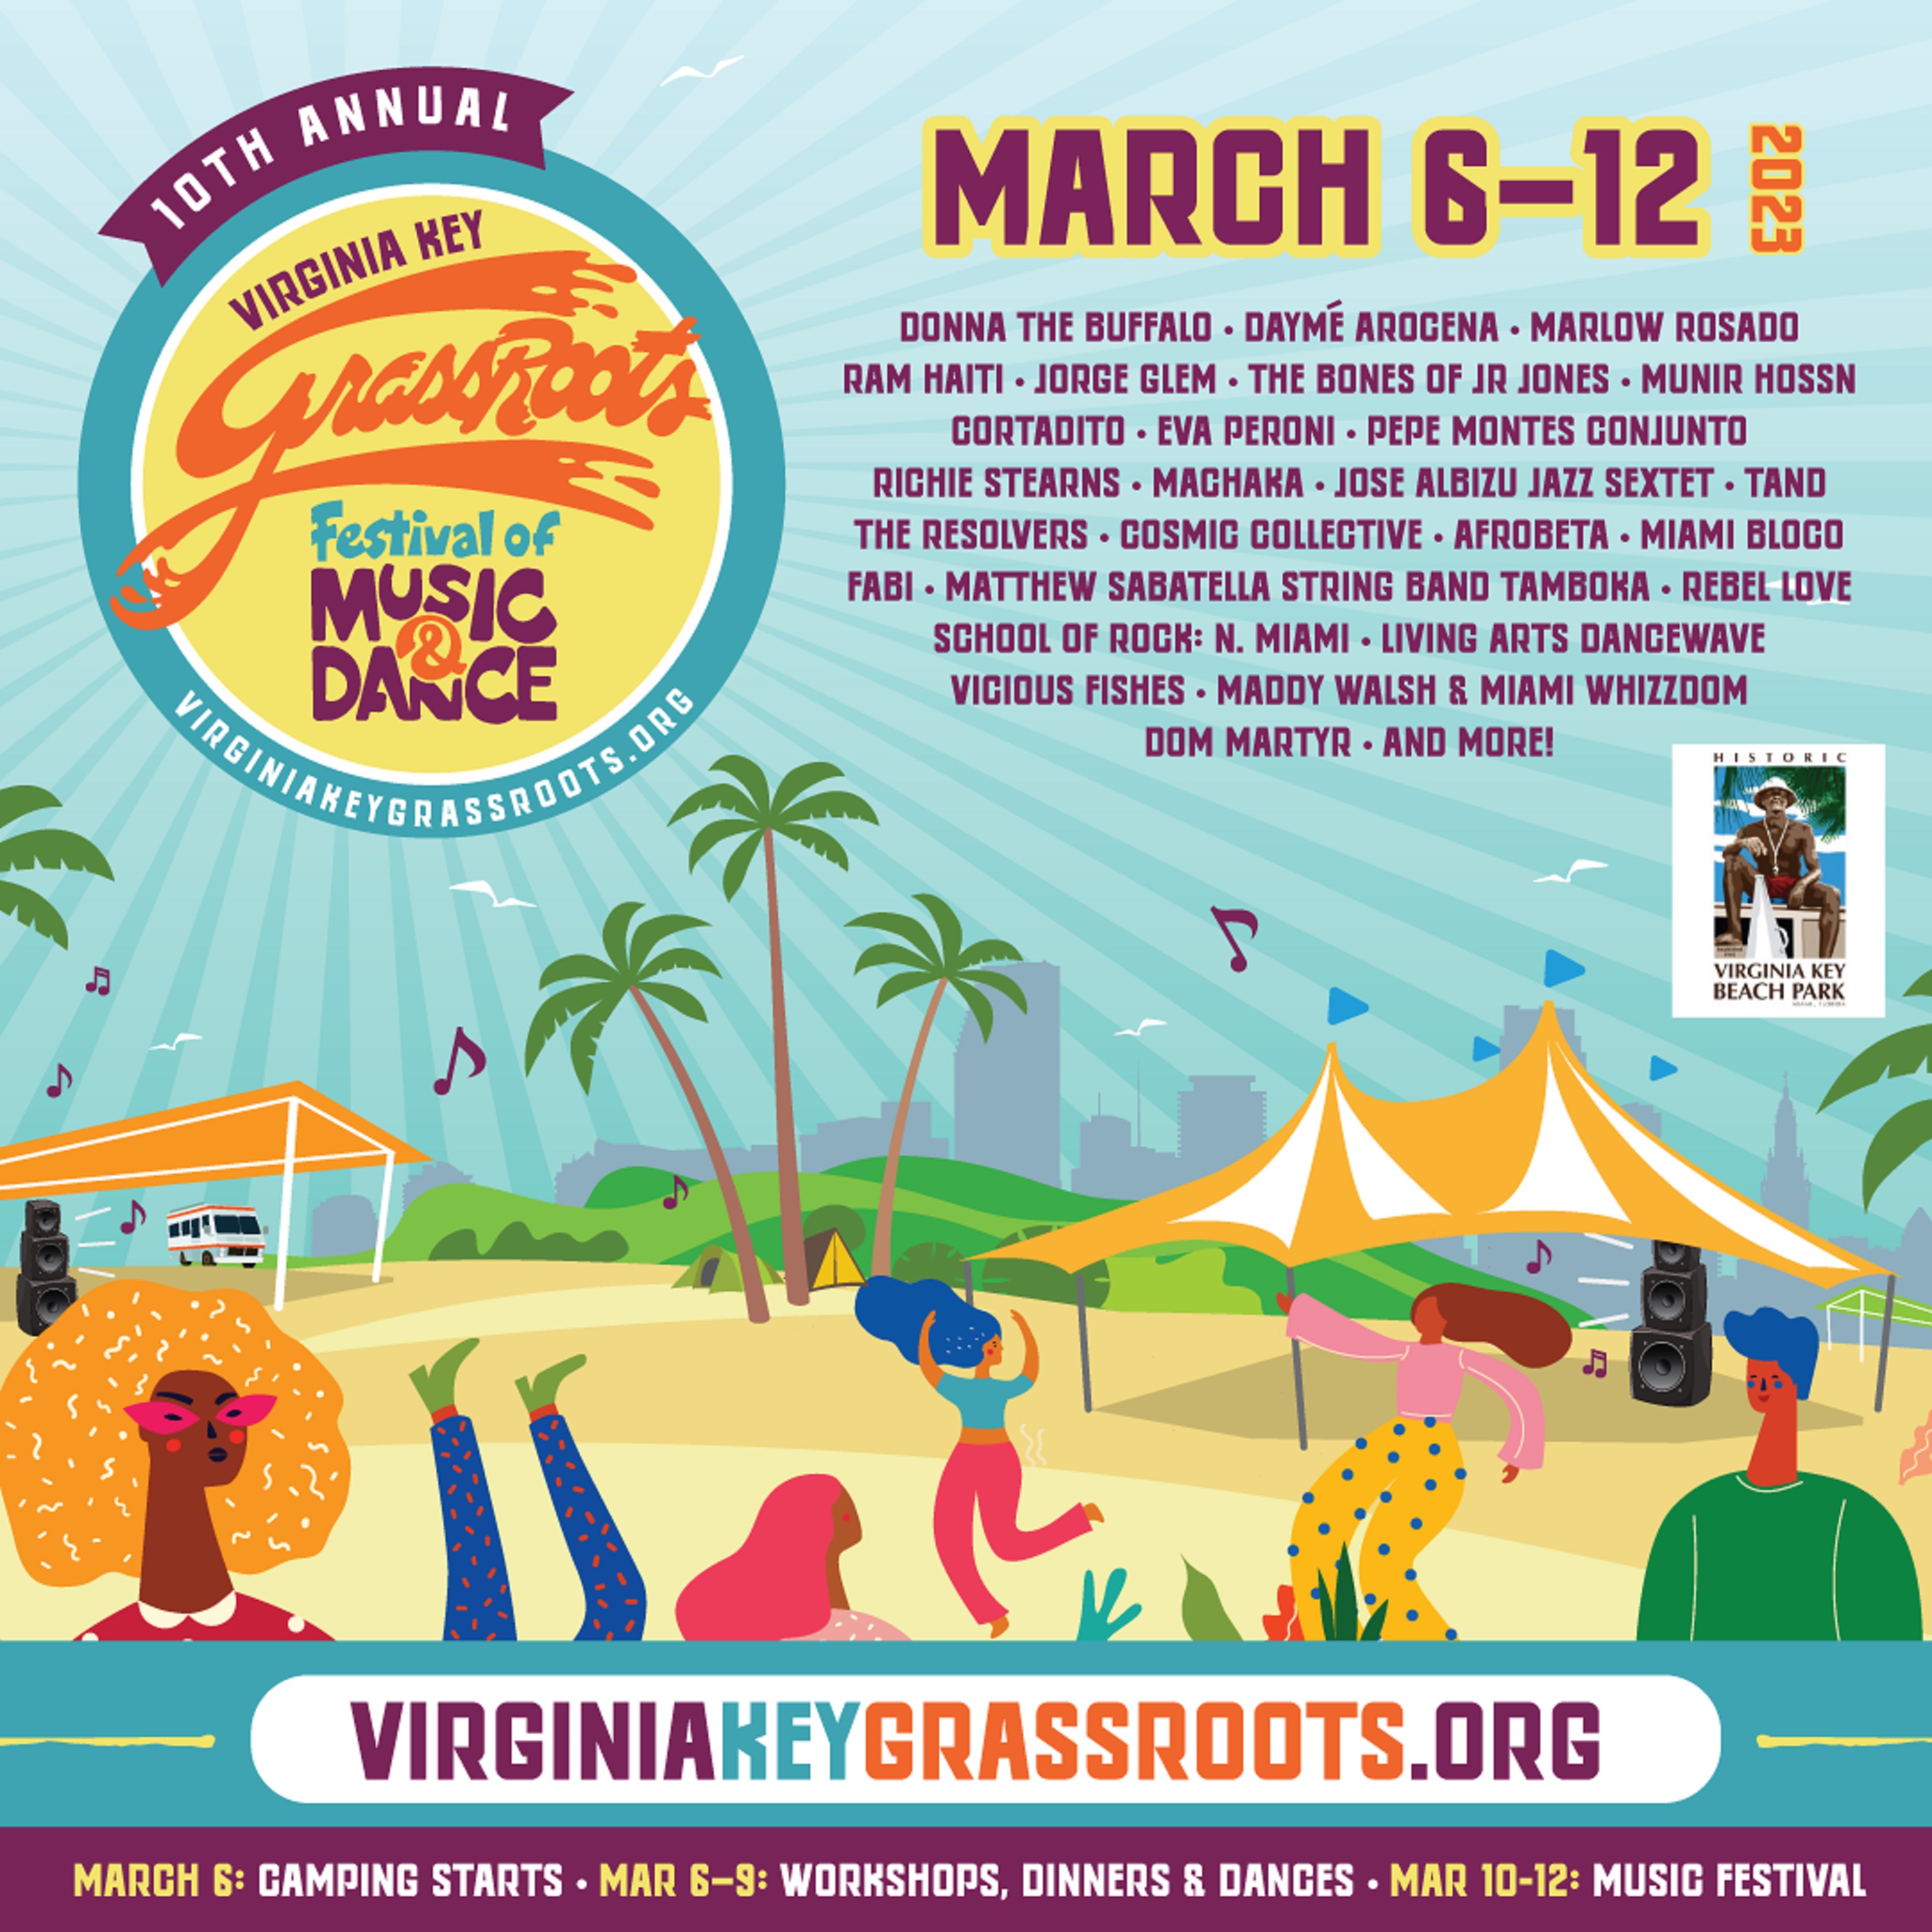 31st Annual Finger Lakes GrassRoots Festival Tickets On Sale Now!